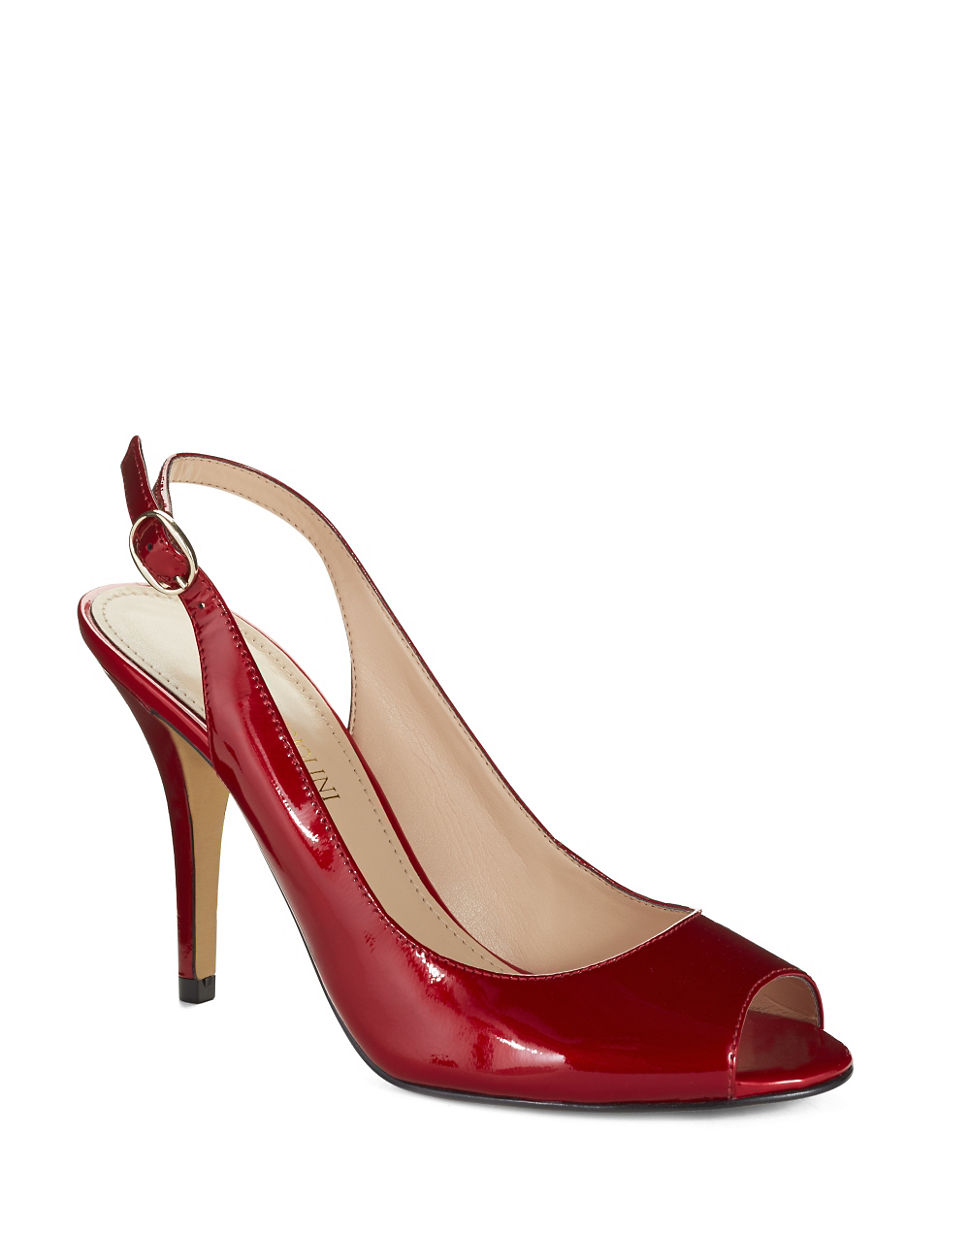 Lyst - Enzo Angiolini Mykell Peeptoe Slingback Pumps in Red